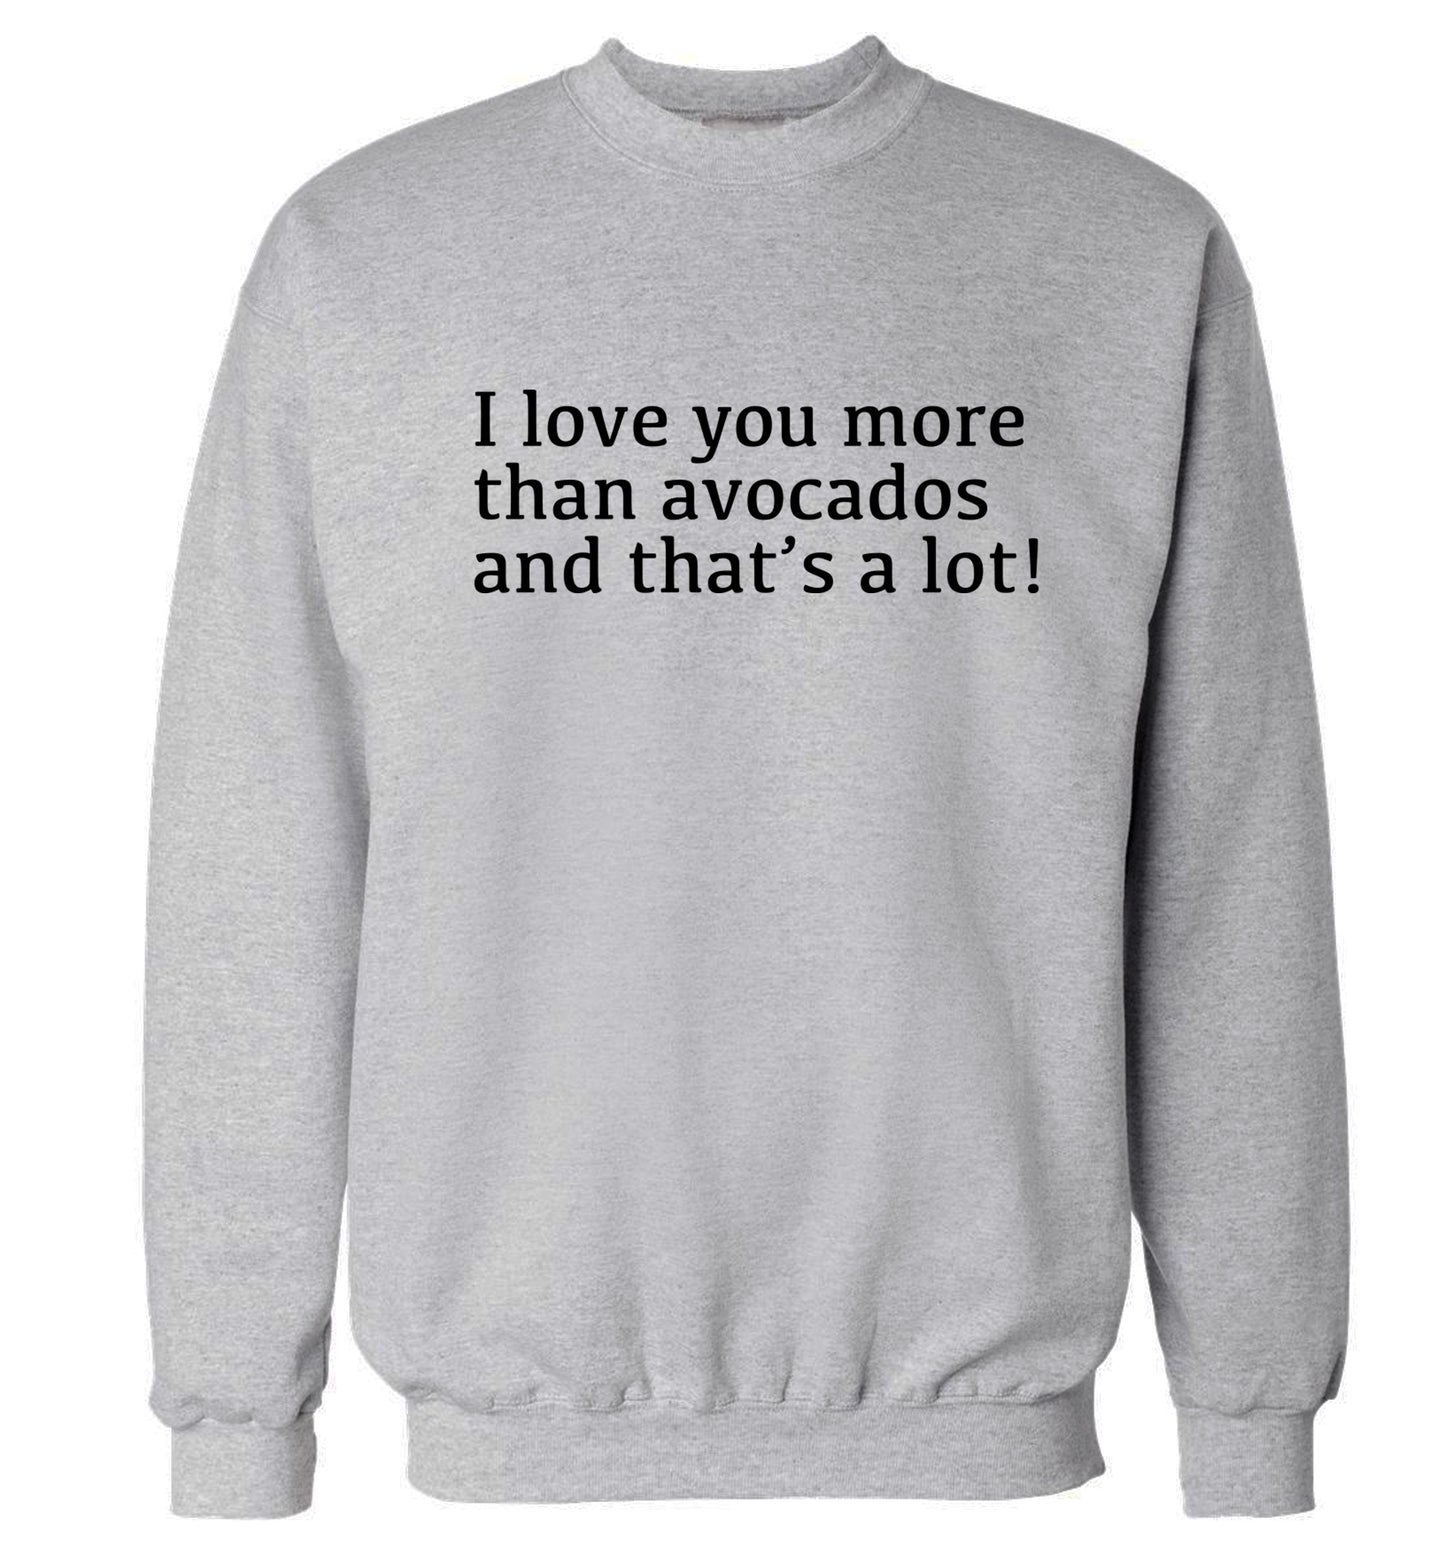 I love you more than avocados and that's a lot Adult's unisex grey Sweater 2XL